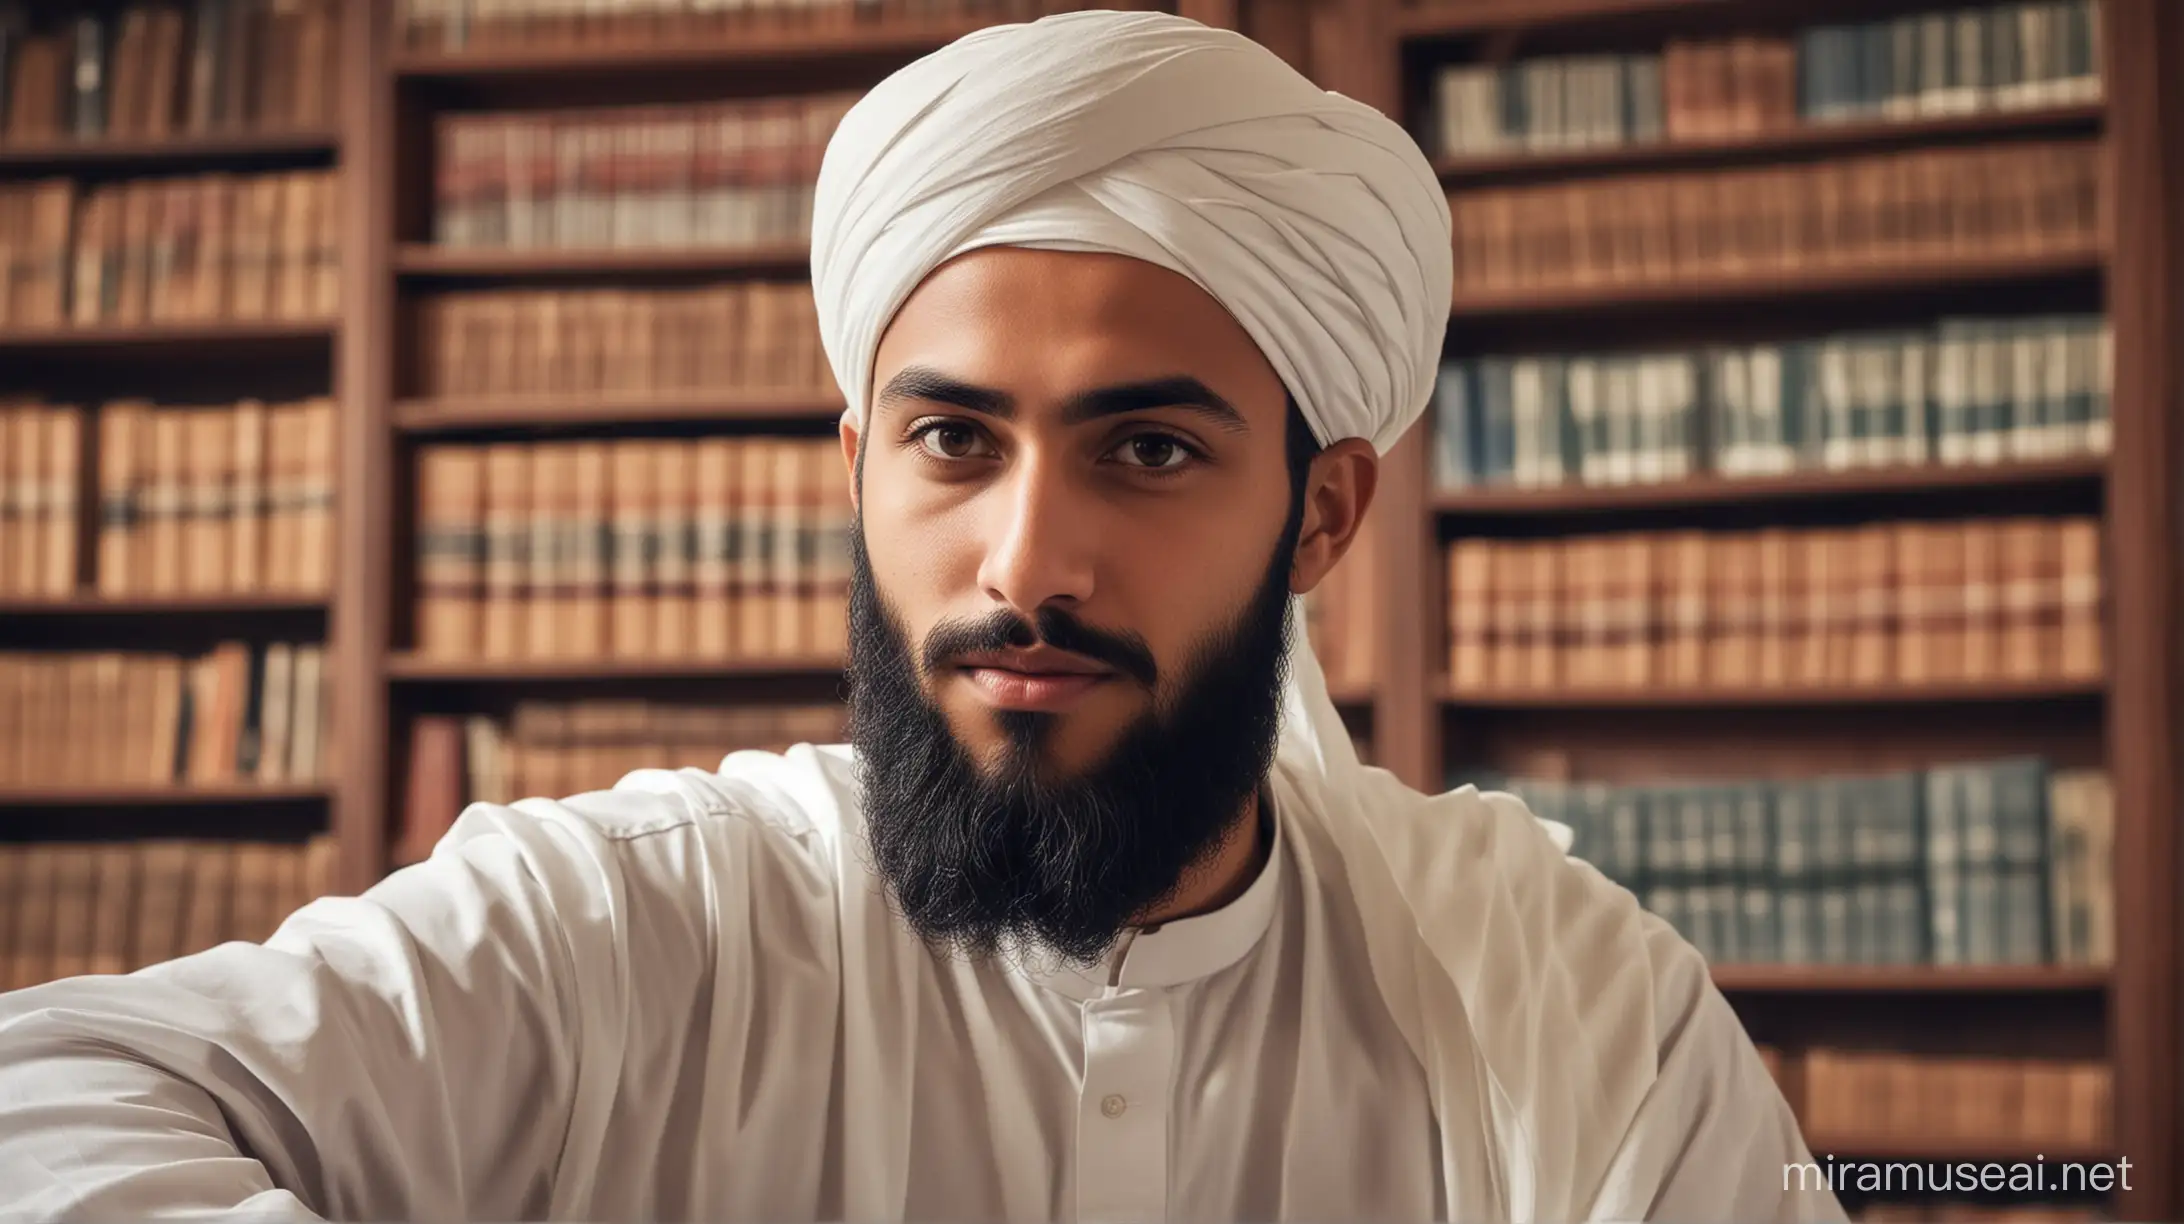 Young Muslim Scholar Giving Lecture in Library Setting